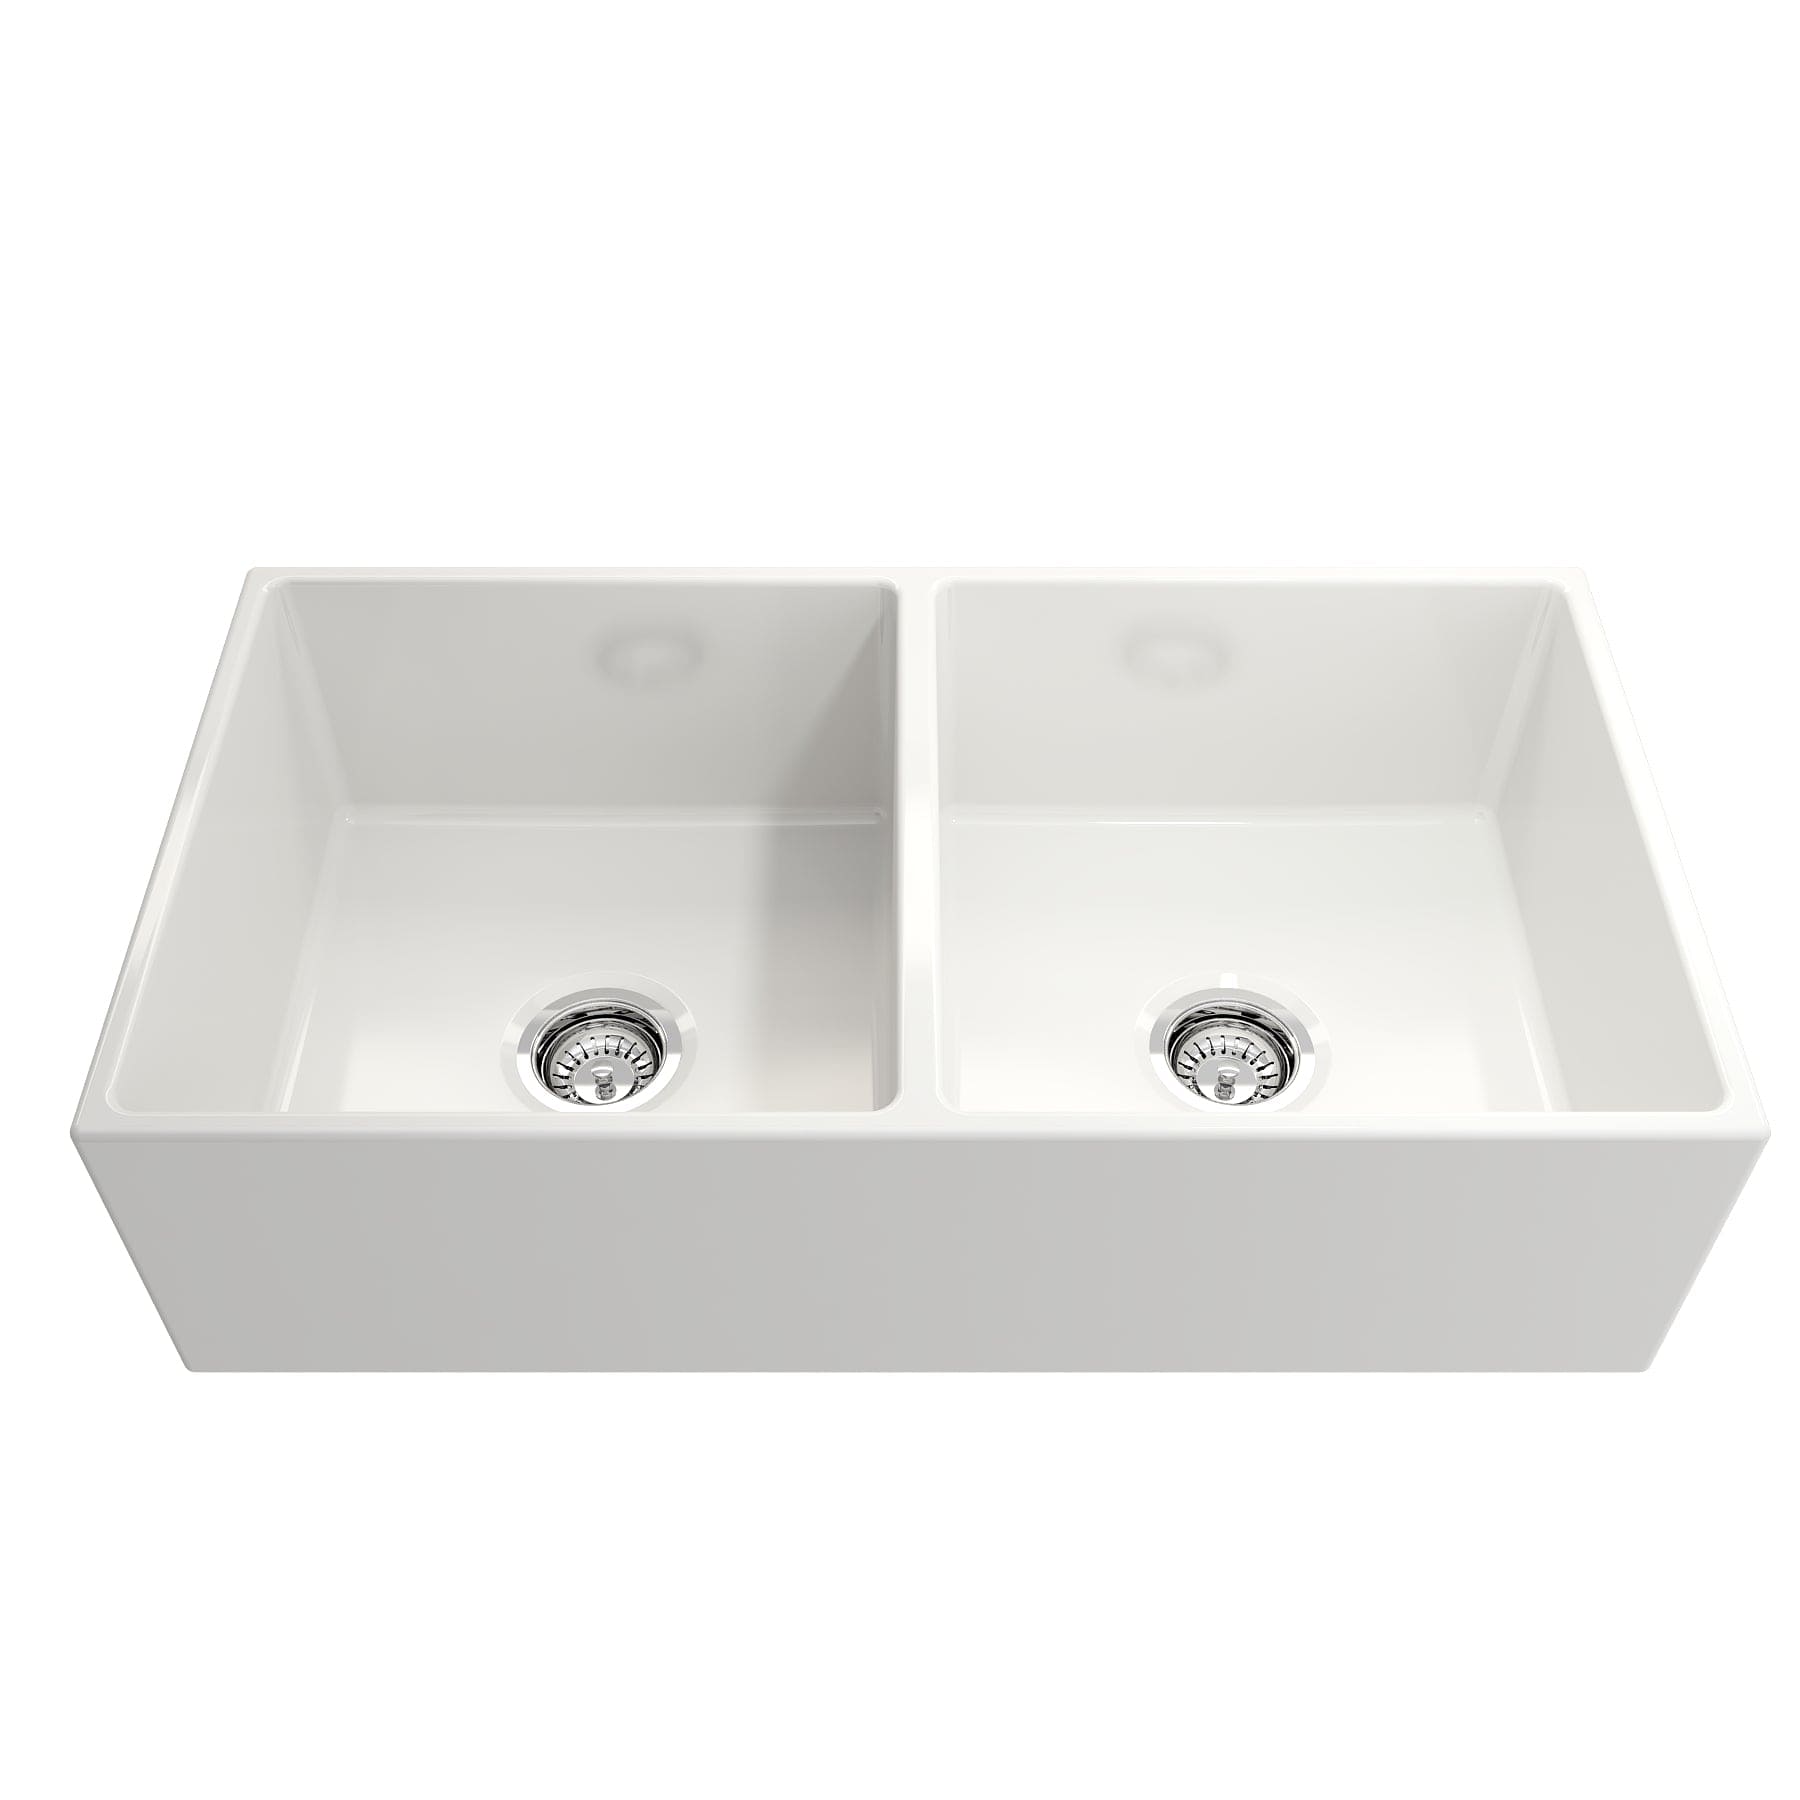 BOCCHI CONTEMPO 36" Fireclay Farmhouse Double Bowl Kitchen Sink with Protective Bottom Grid and Strainer, WHITE - 1350-001-0120 - Manor House Sinks